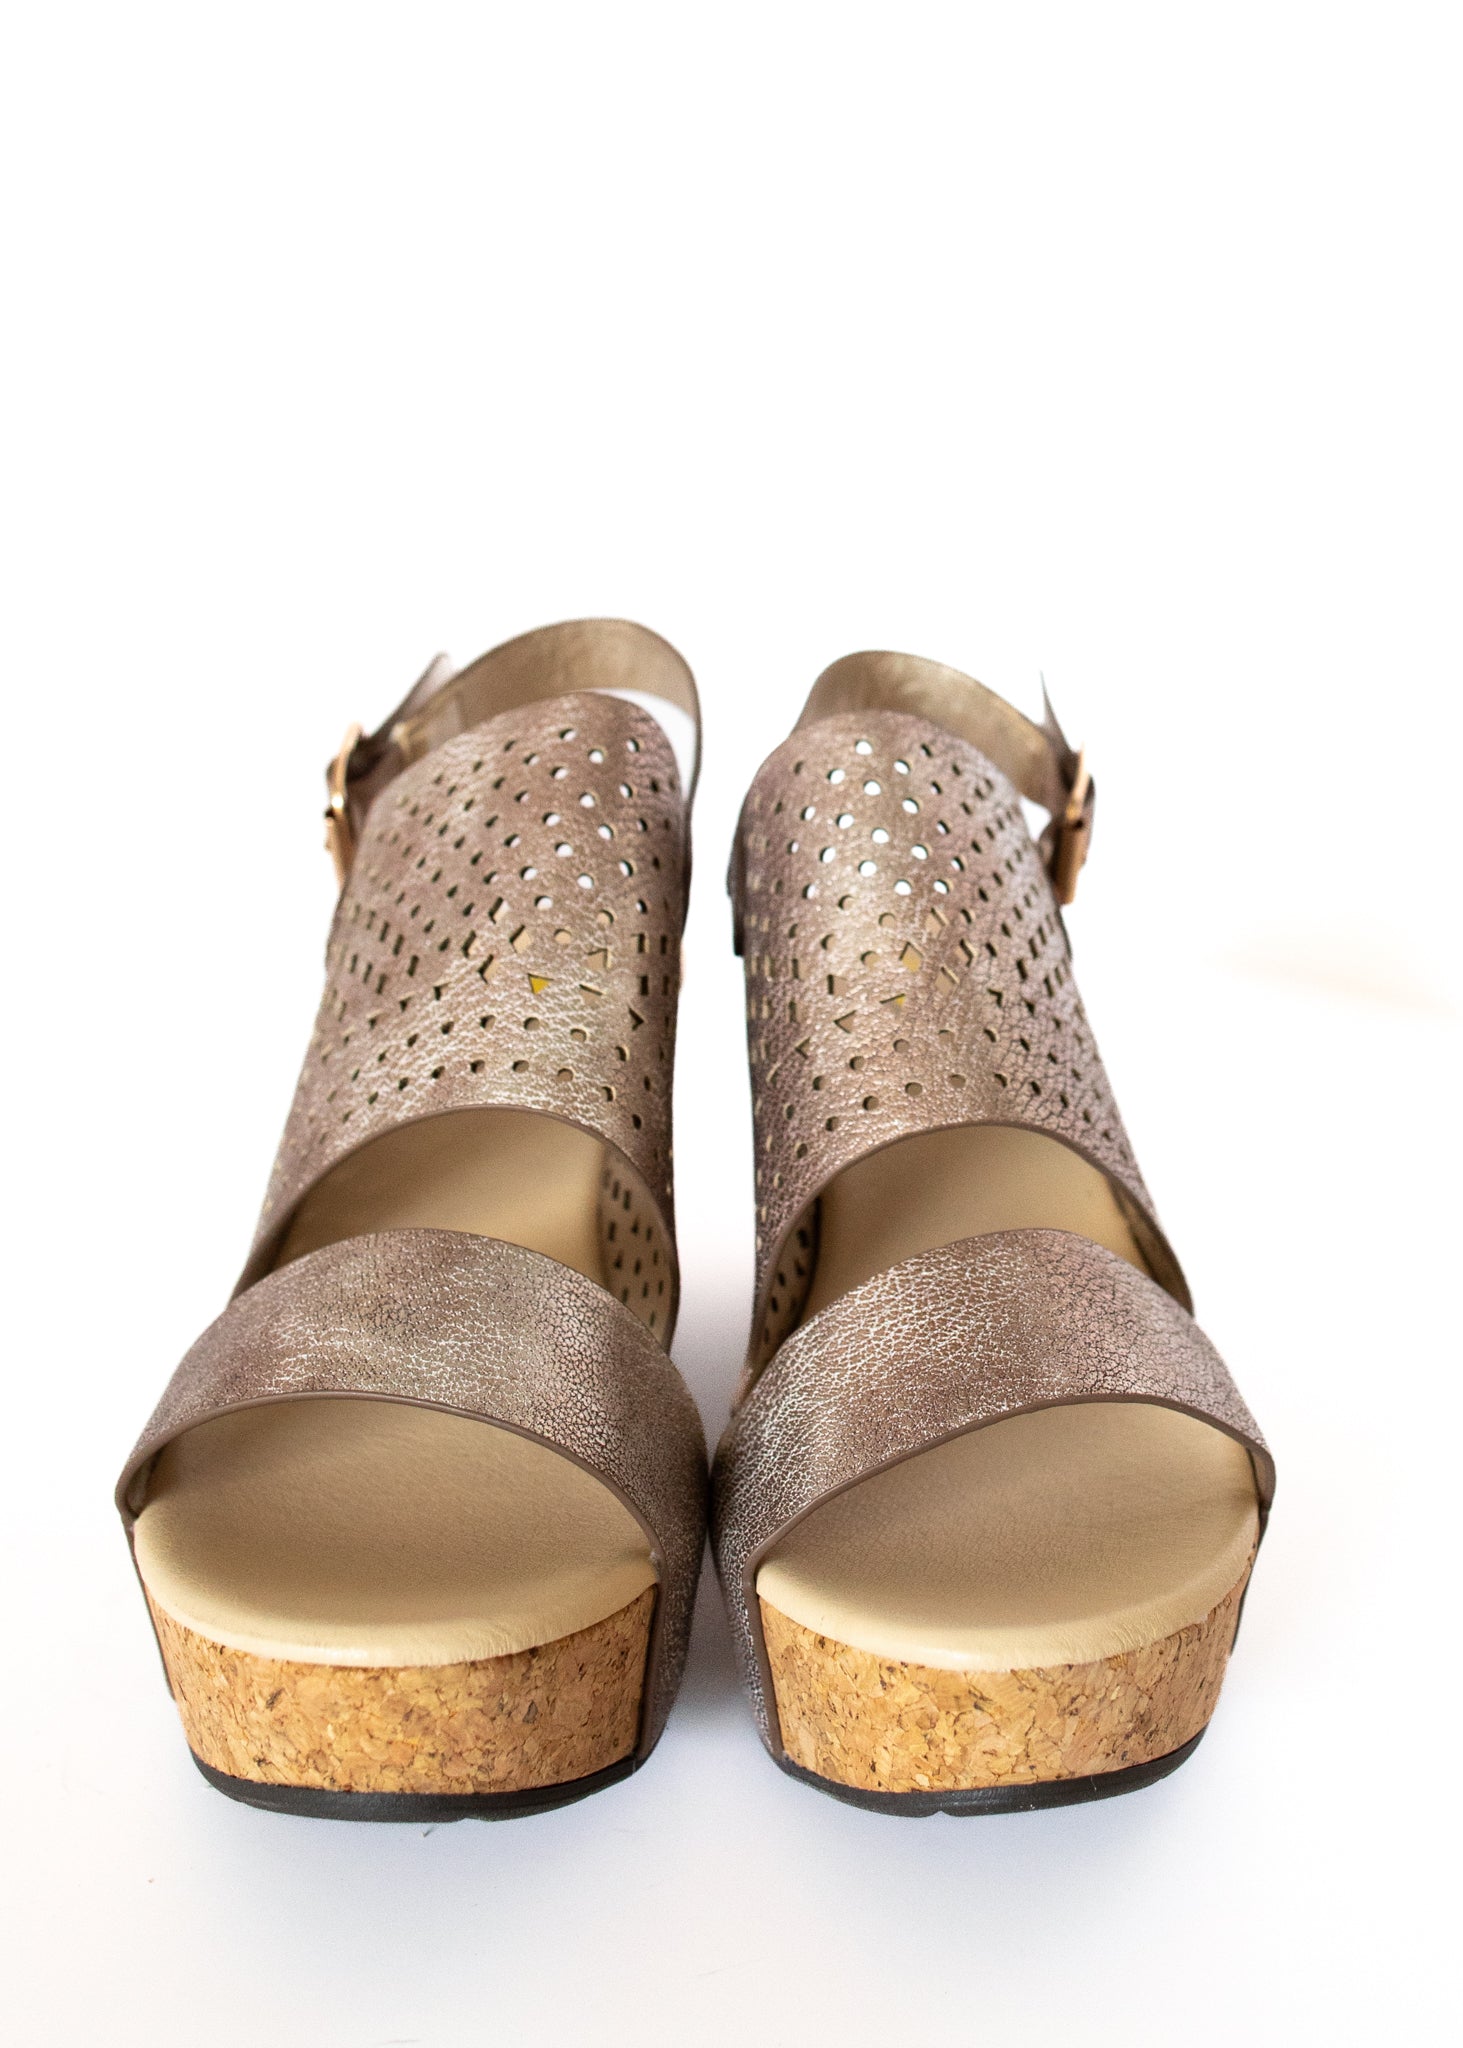 Rayne Cork Wedges in Rose Gold